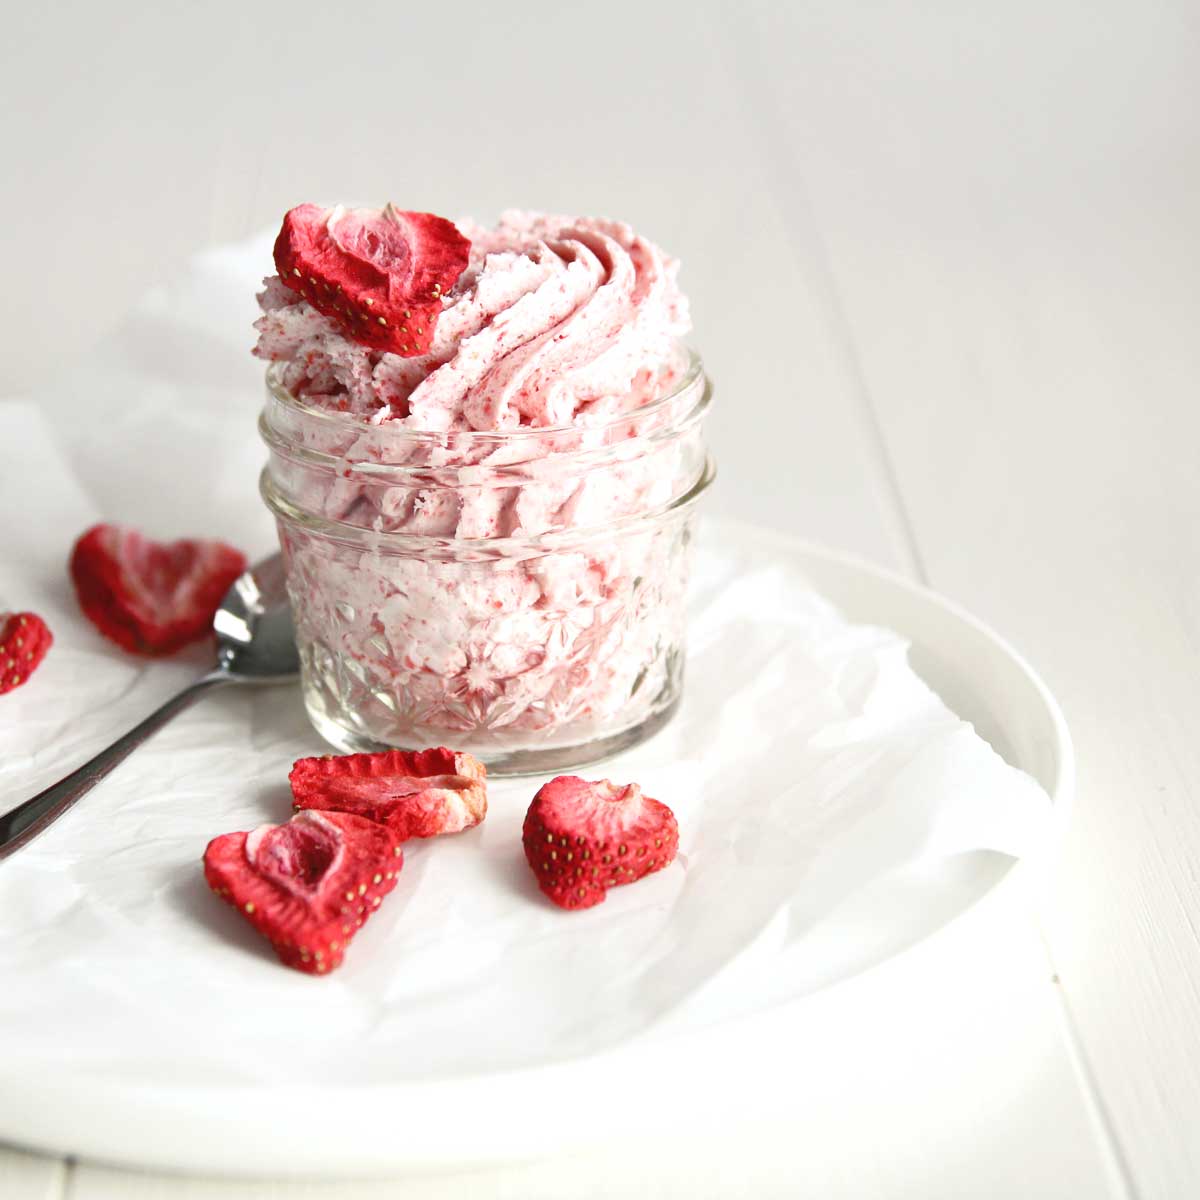 So Simple! Strawberry Whipped Cream (Chantilly Cream) Recipe - Nutella Chocolate Whipped Cream